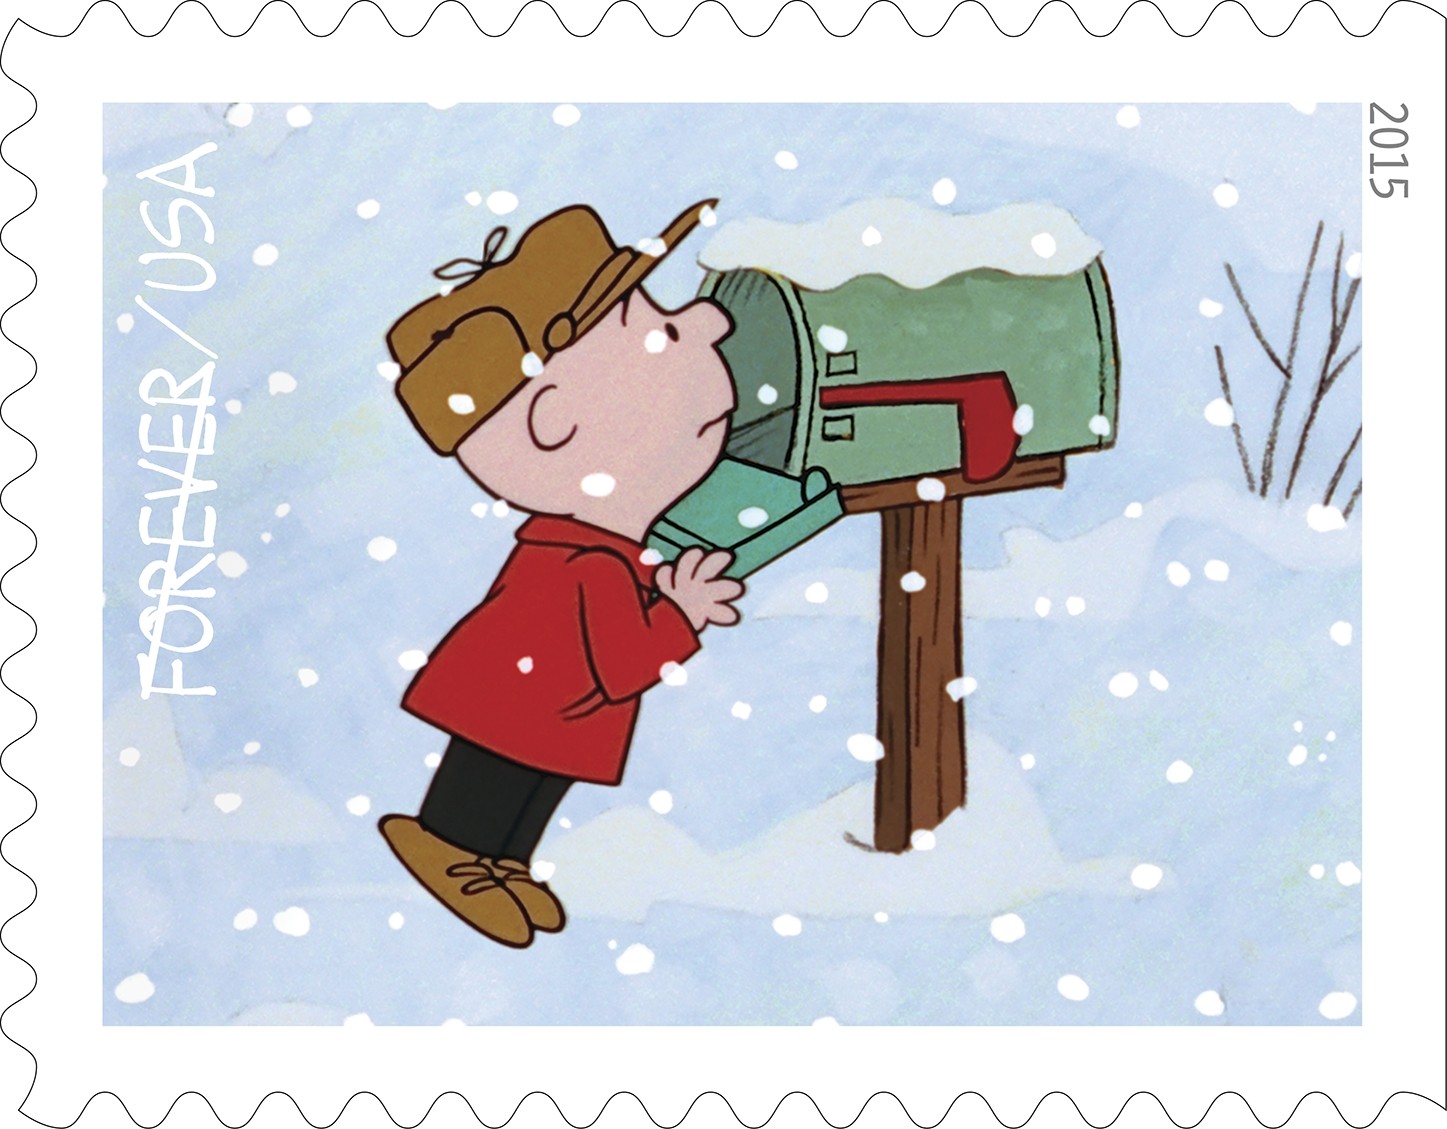 The Charlie Brown Christmas stamp collection makes its Postal Service debut this year to celebrate the 50th anniversary of “A Charlie Brown Christmas.”